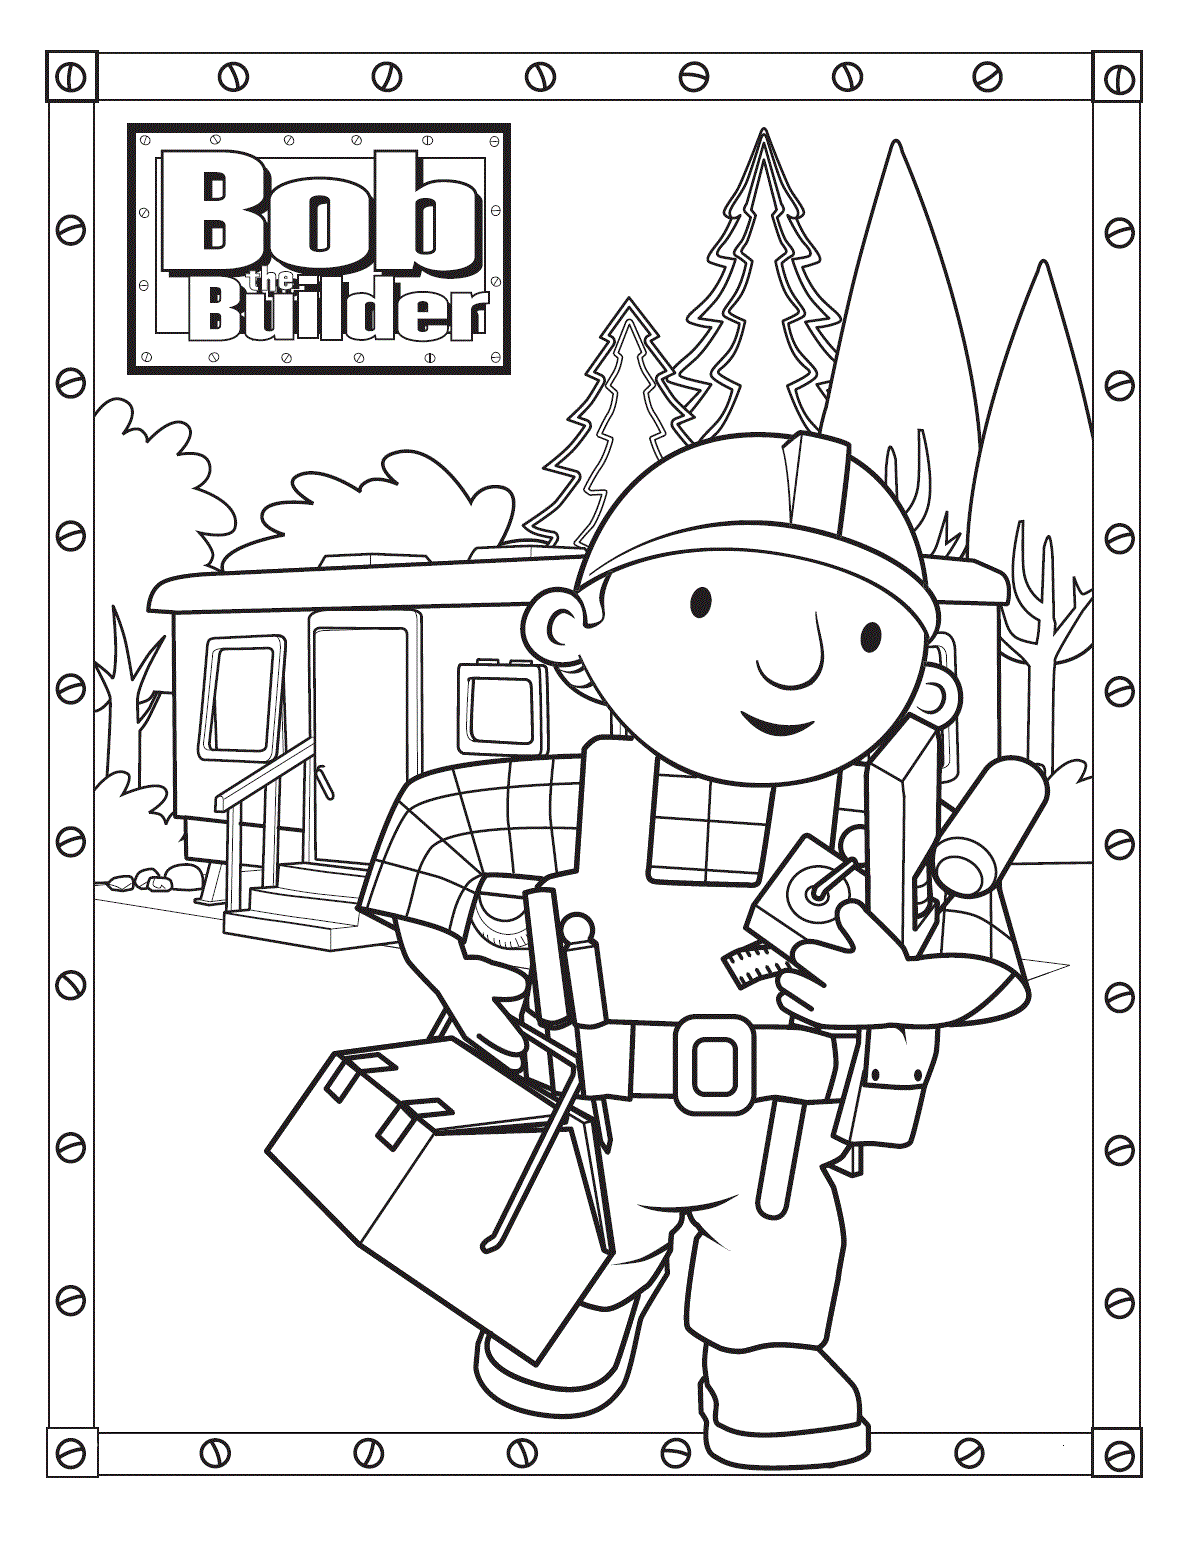 Bob the Builder Coloring Pages TV Film Free Bob The Builder Printable 2020 01139 Coloring4free